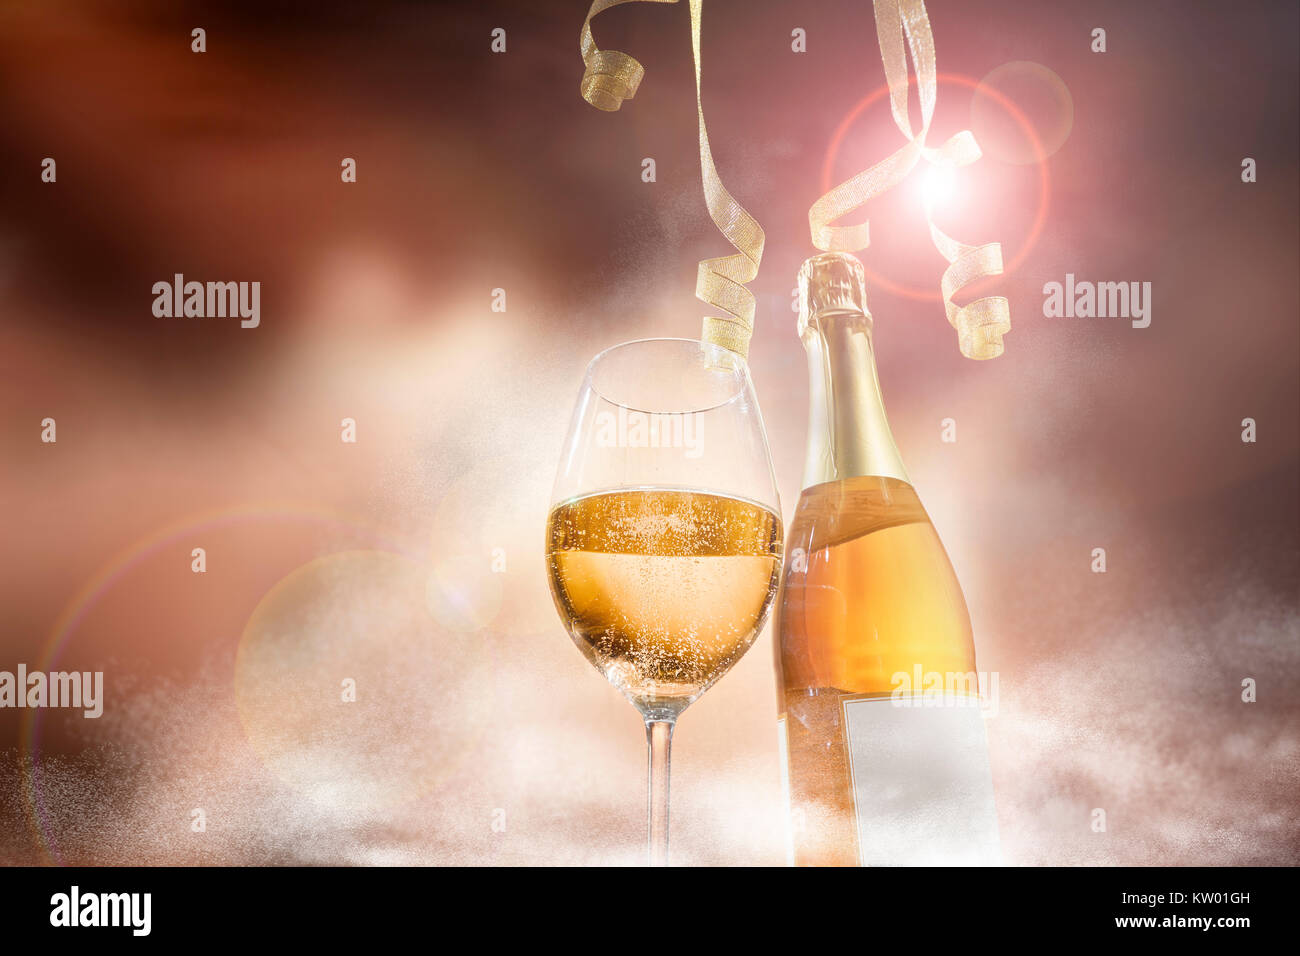 Champagne and wine glasses. Party time. Stock Photo